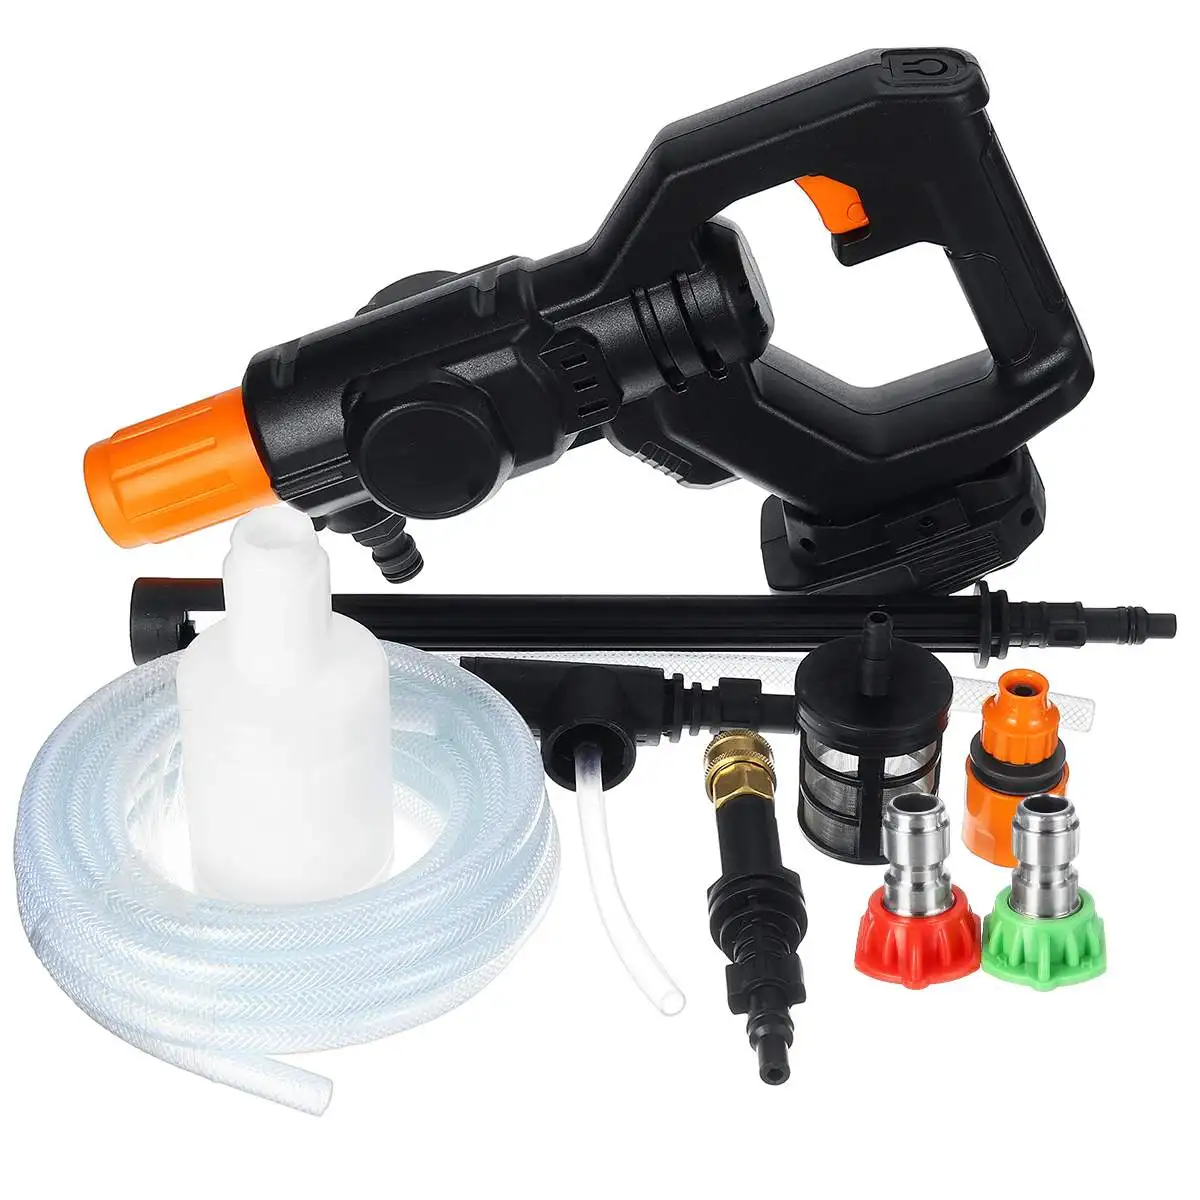 

Cordless High Pressure Washer for Makita 18V Battery Power Washer Portable Washer Guns with Foam Generator Nozzle Water Pump